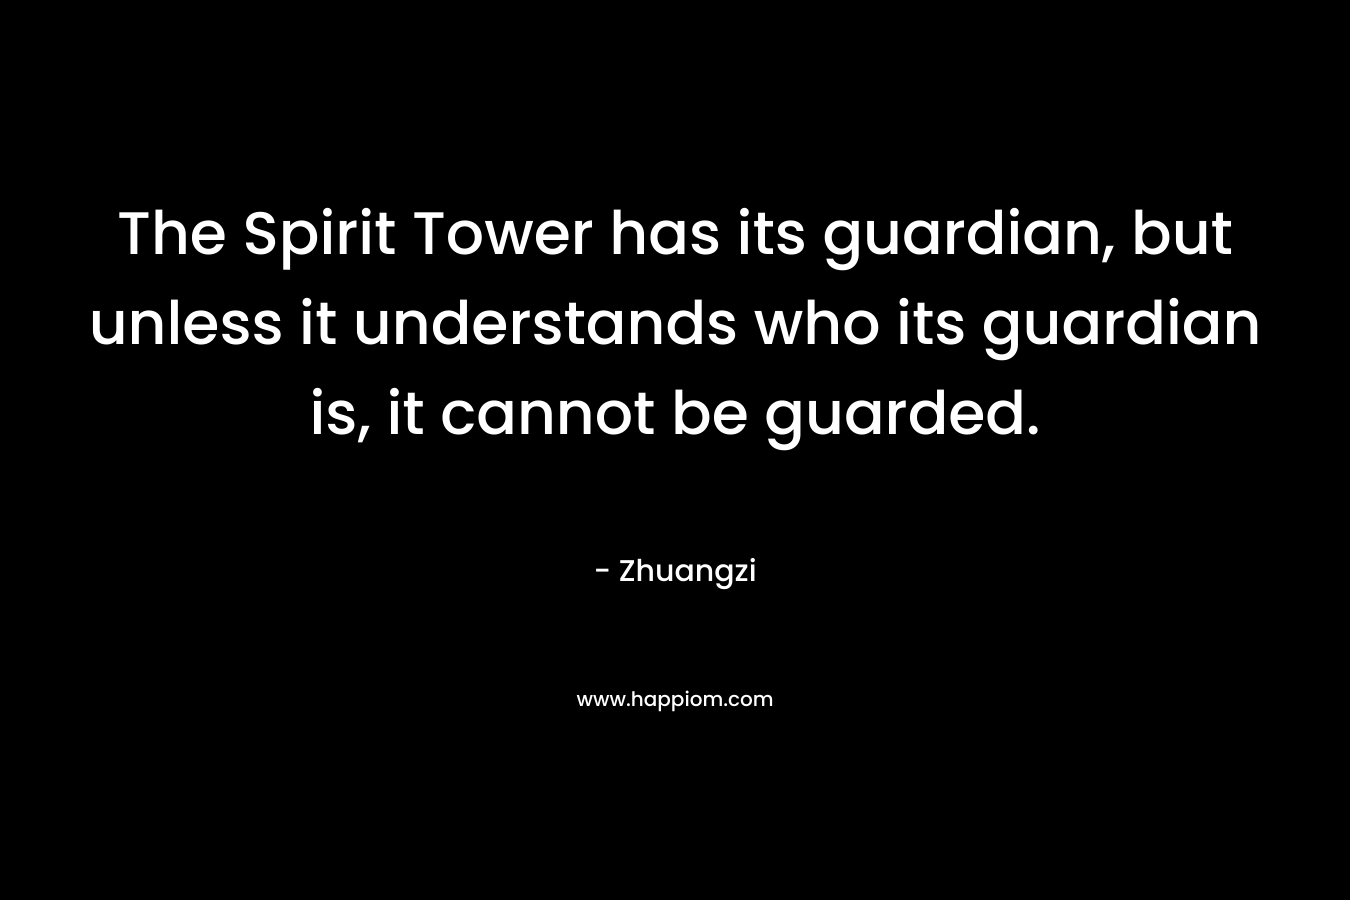 The Spirit Tower has its guardian, but unless it understands who its guardian is, it cannot be guarded. – Zhuangzi